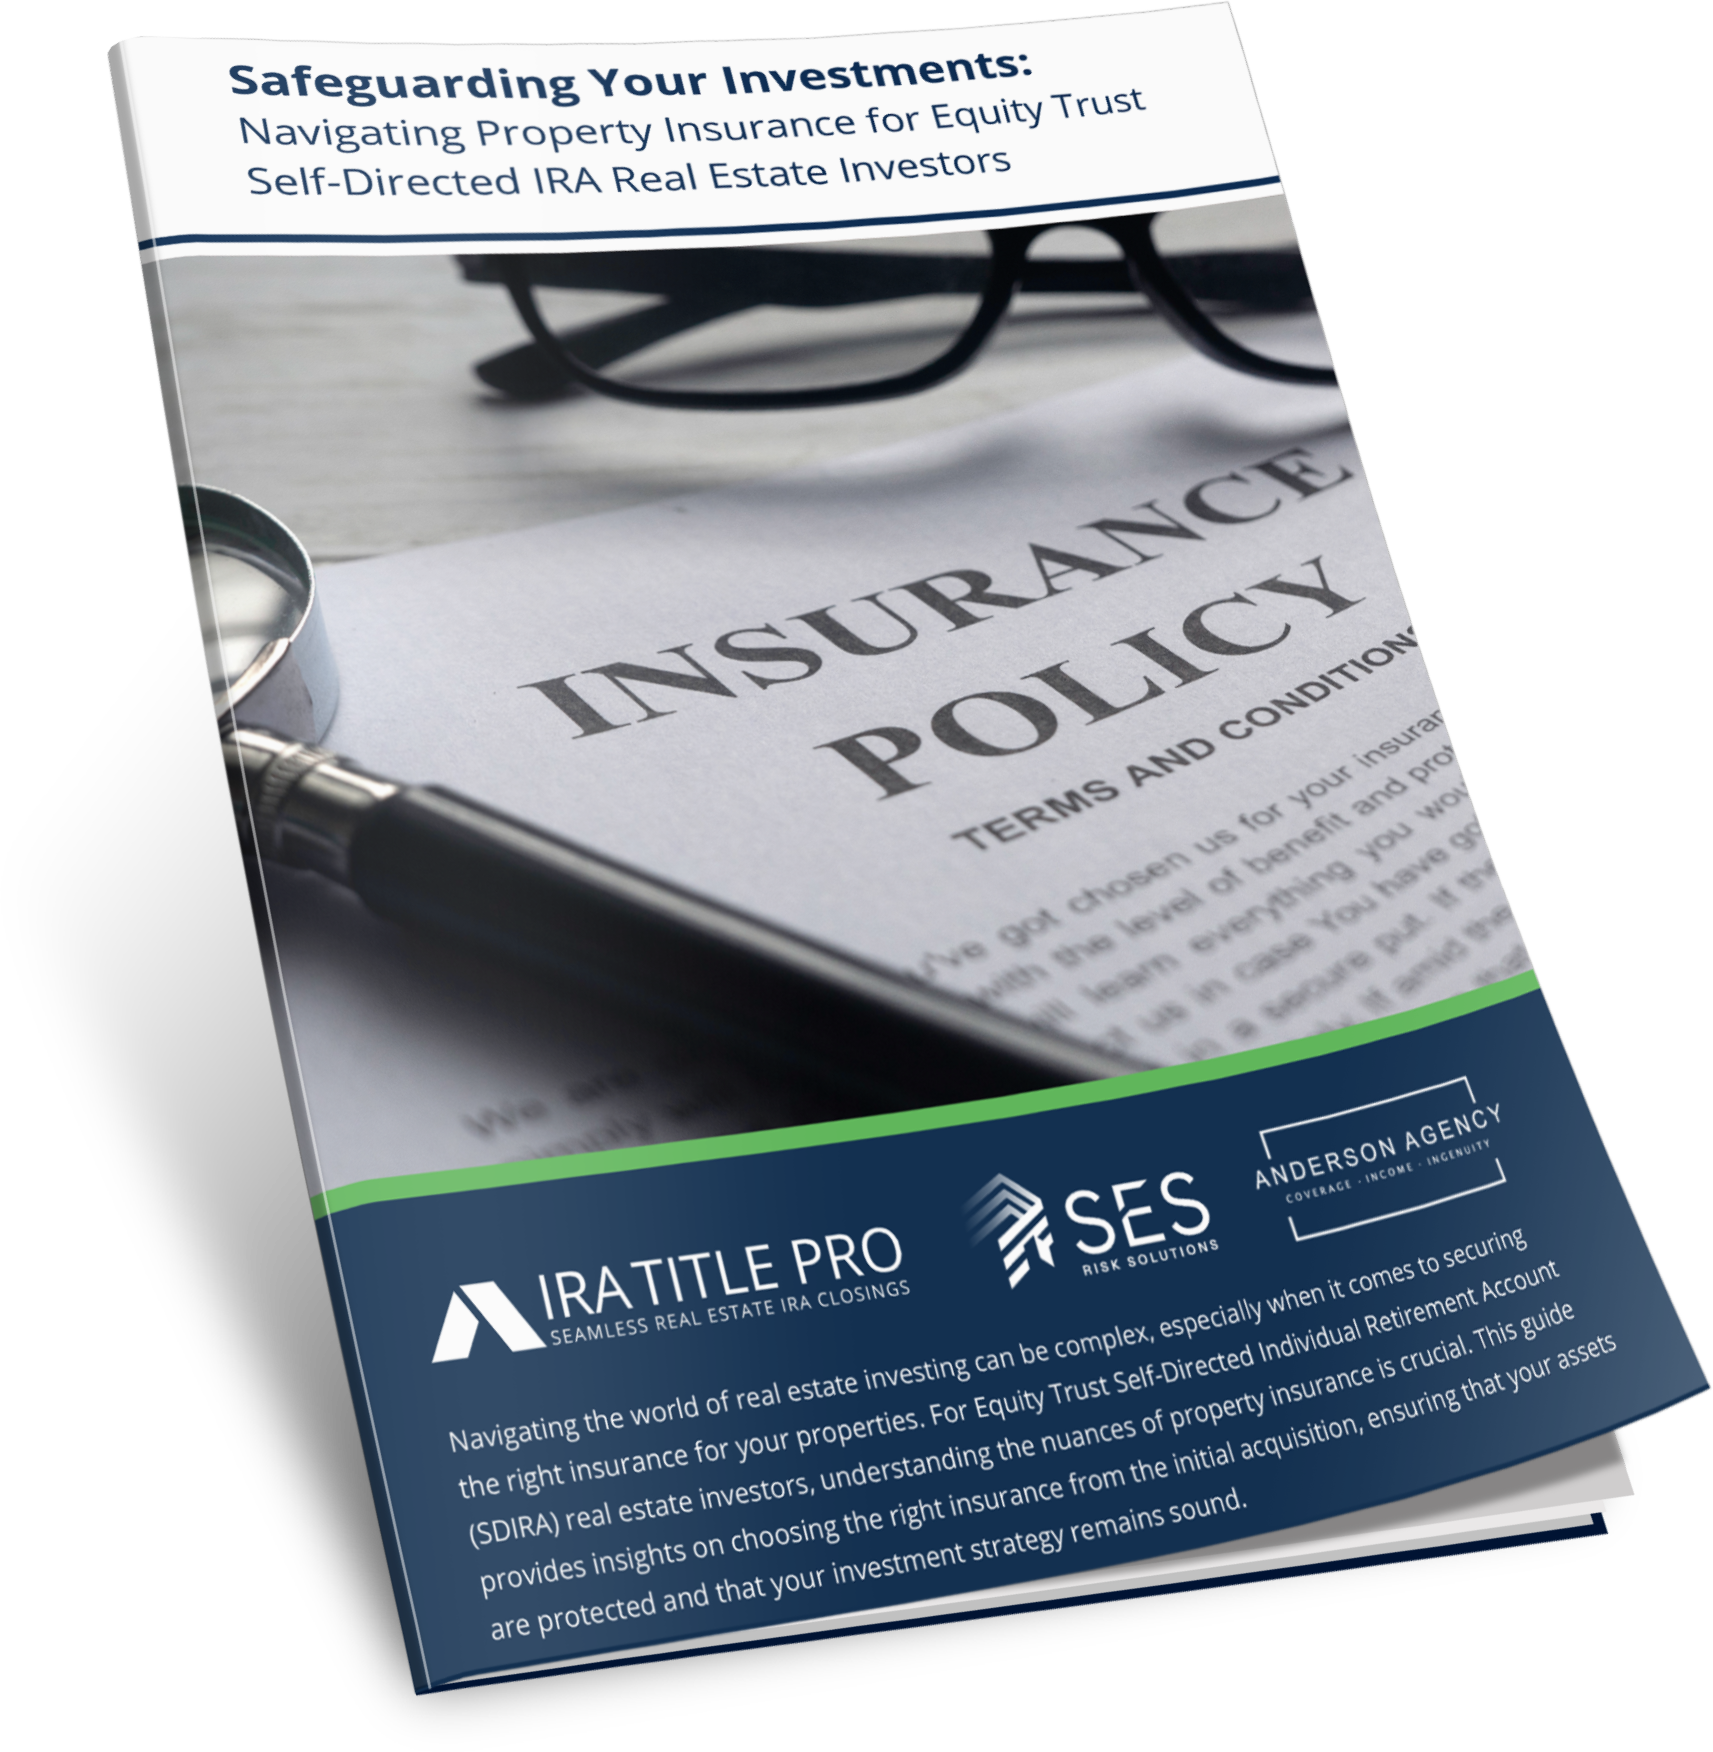 Guide: Safeguarding Your Investments: Navigating Propety Insurance for Equity Trust Self-Directed IRA Real Estate Investors